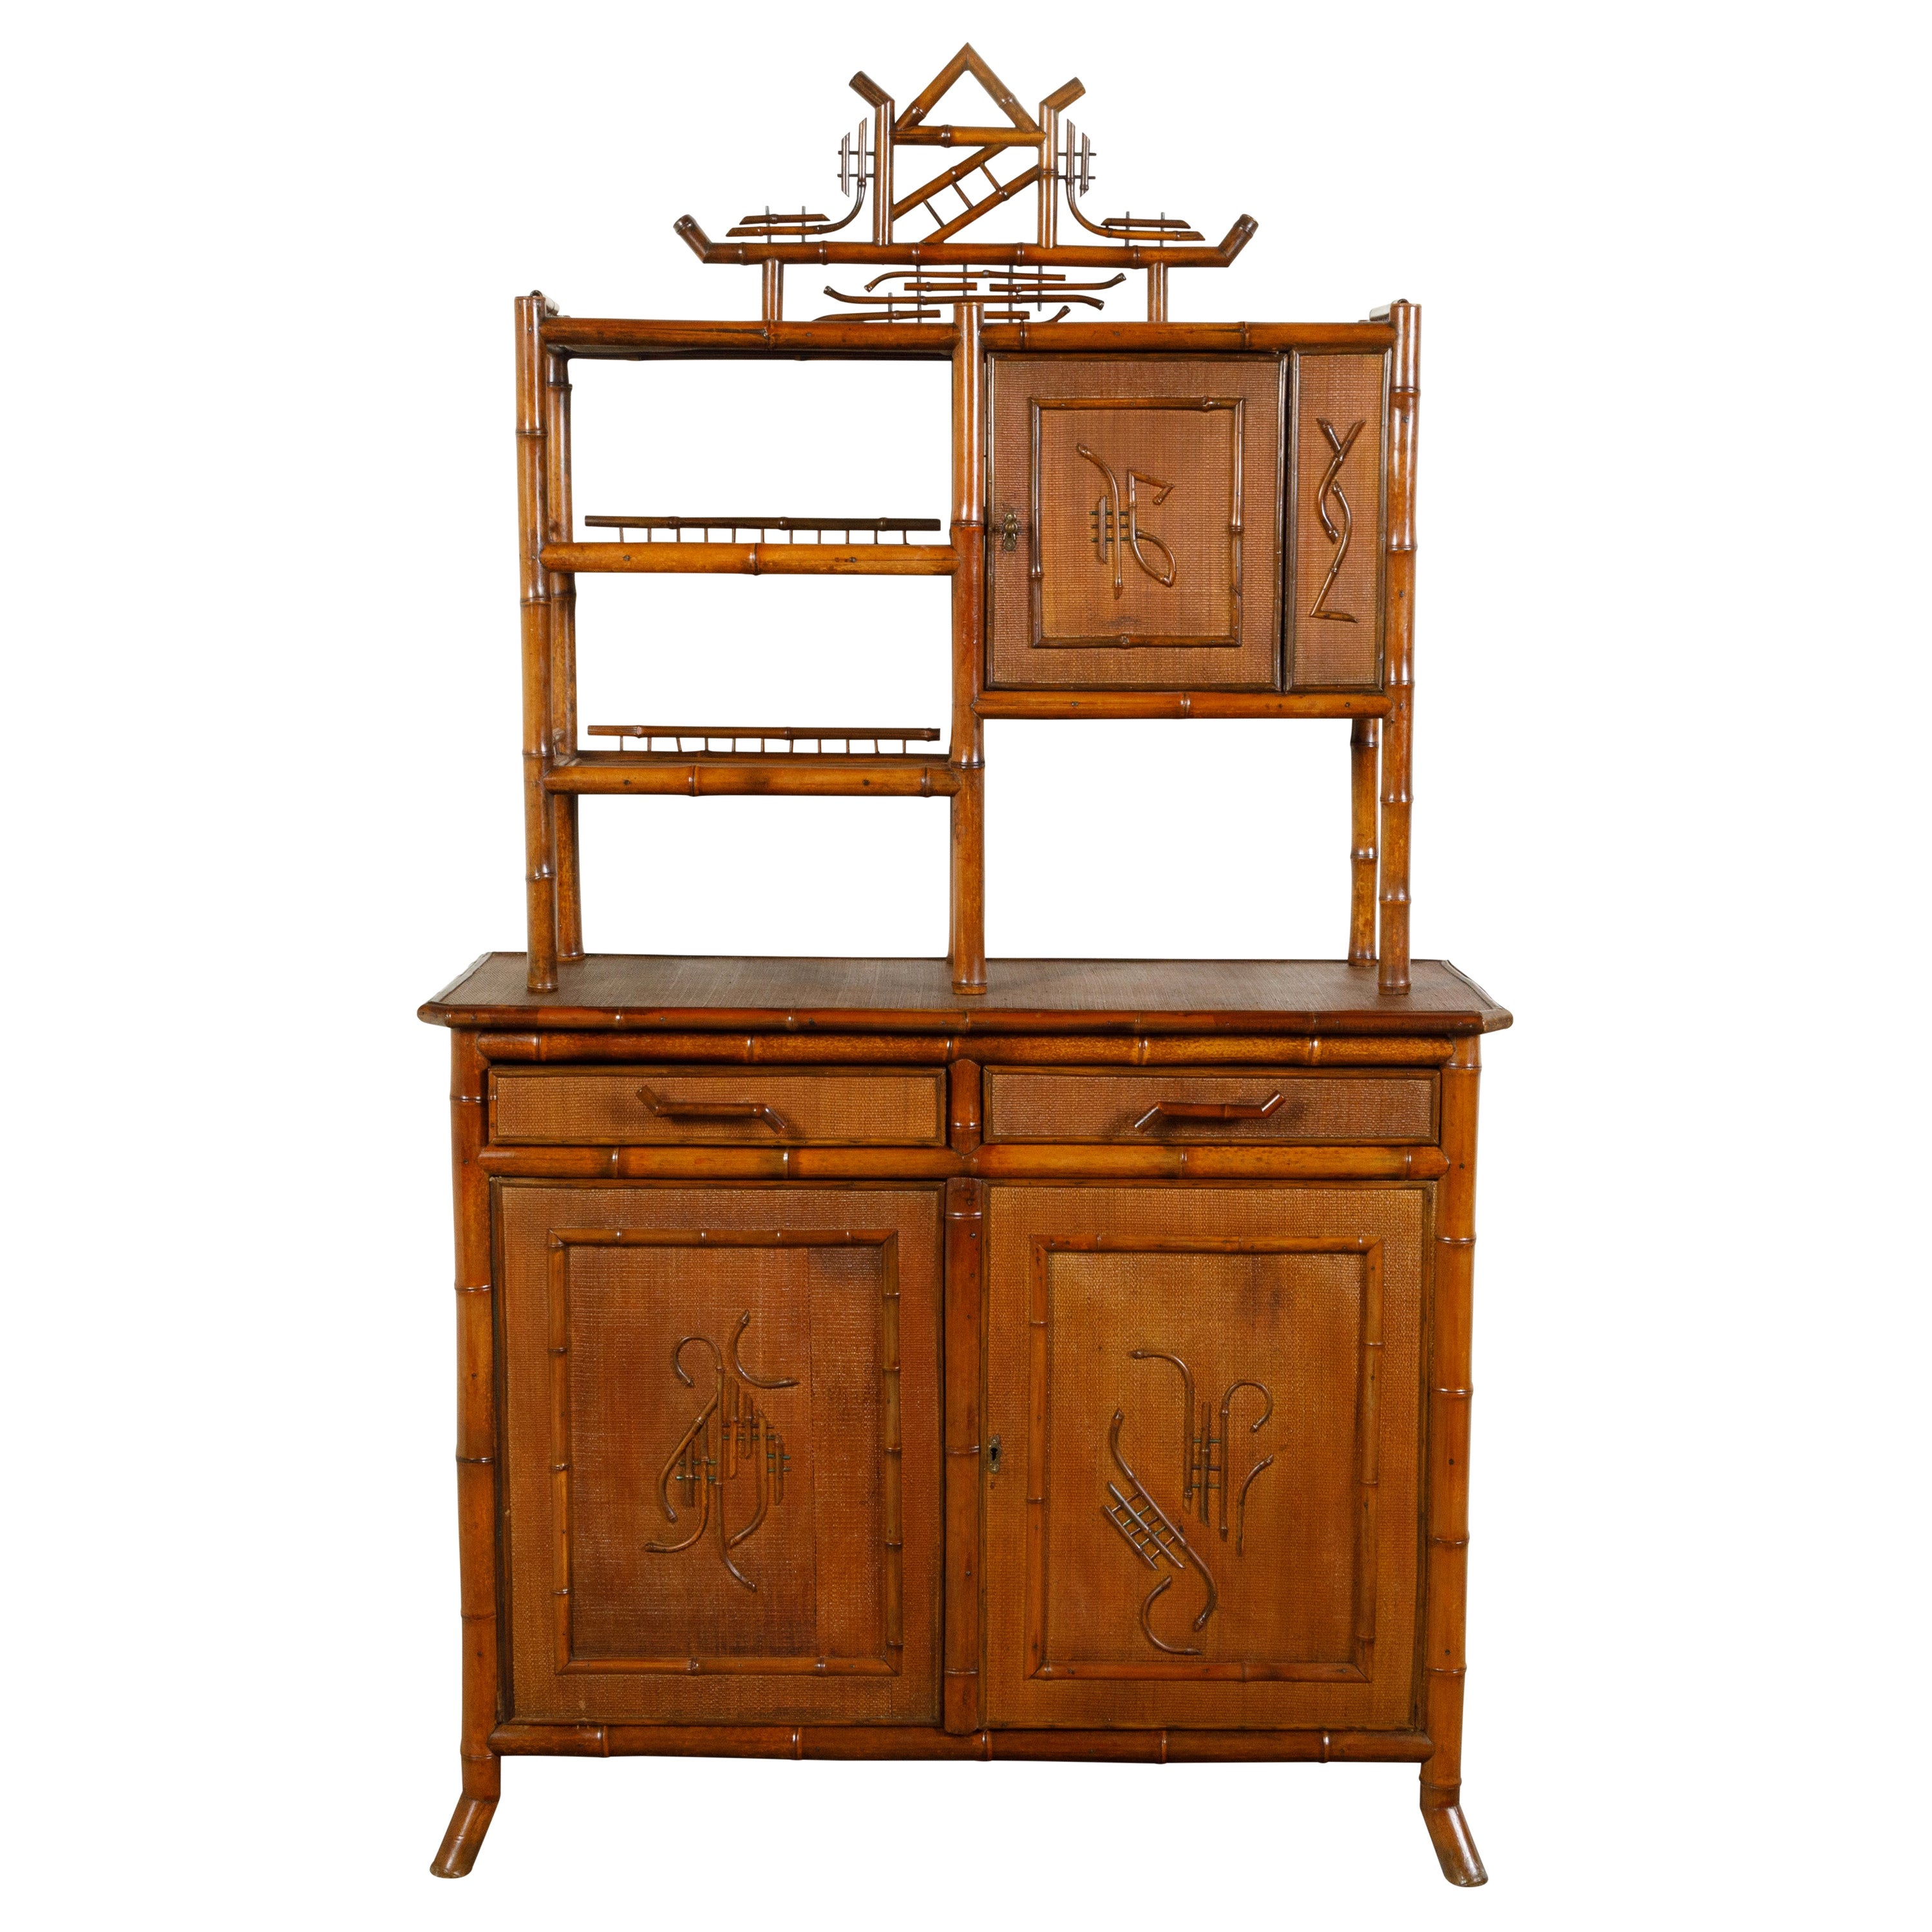 English 1900s Bamboo Chinoiserie Cabinet with Open Shelves, Drawers and Doors